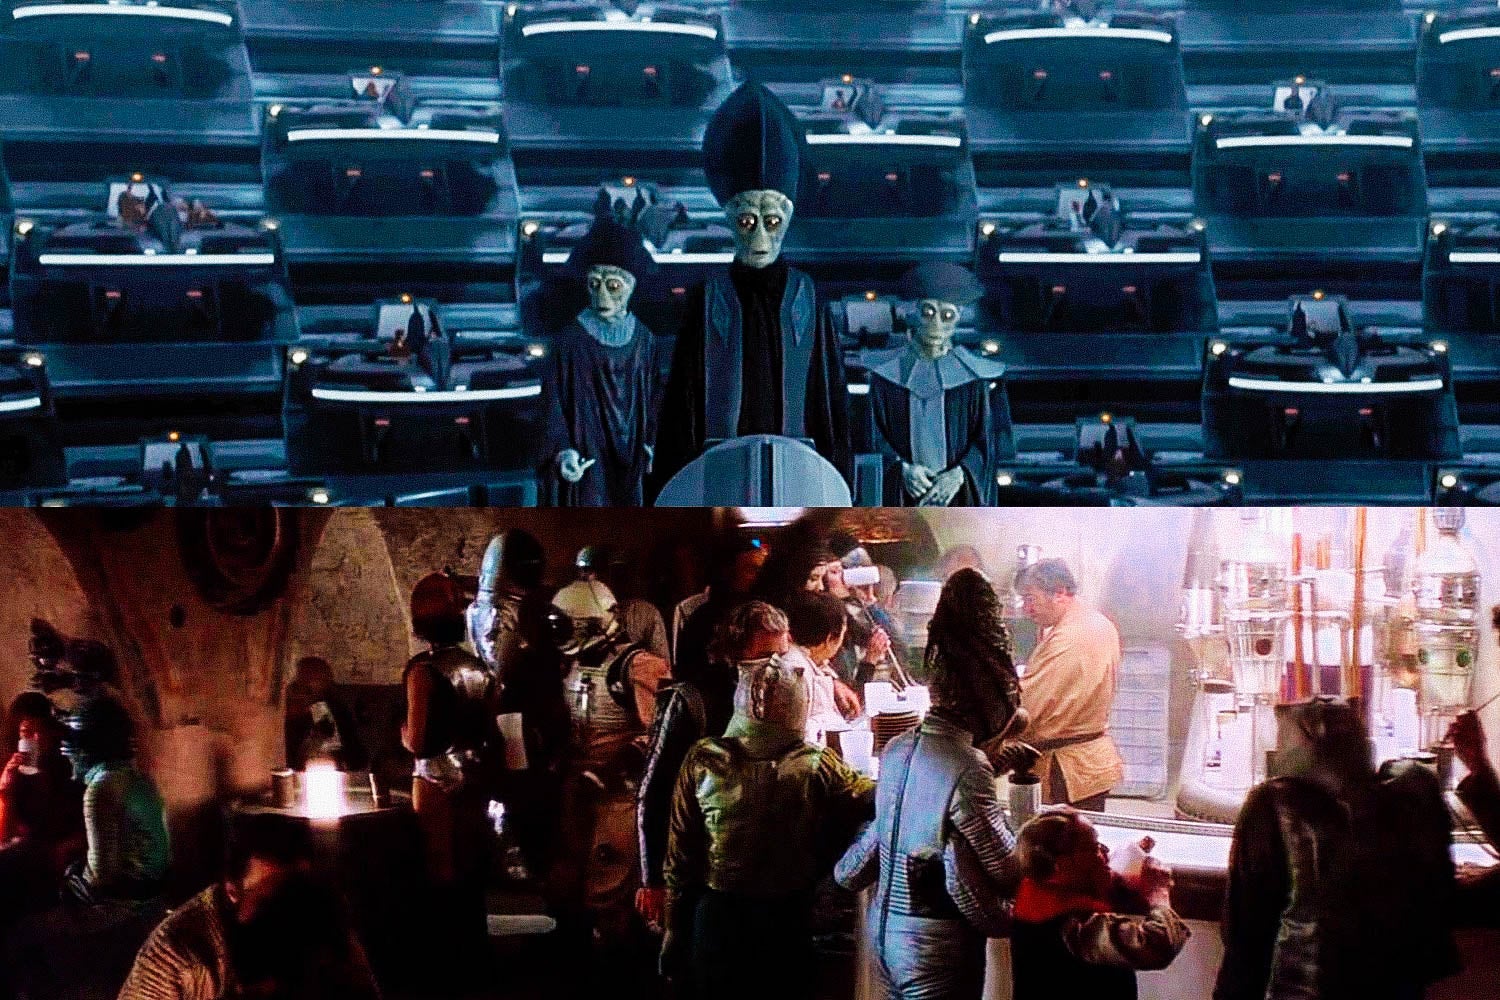 Top: Aliens are depicted in the foreground against a vertical backdrop on which other aliens are standing on various balconies. Bottom: Aliens crowd around a bar.